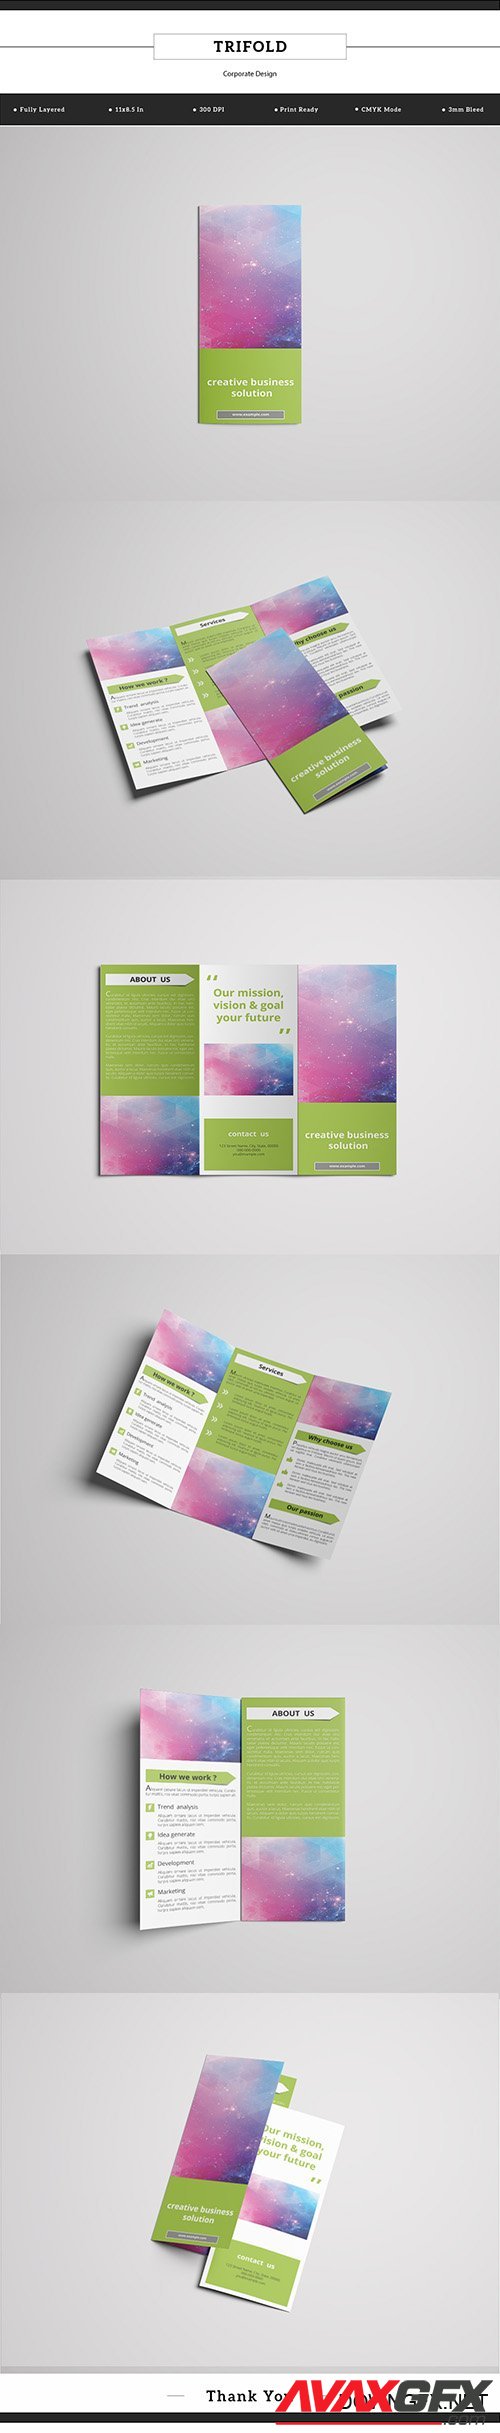 Trifold Brochure Layout with Green Accents 1 189539384